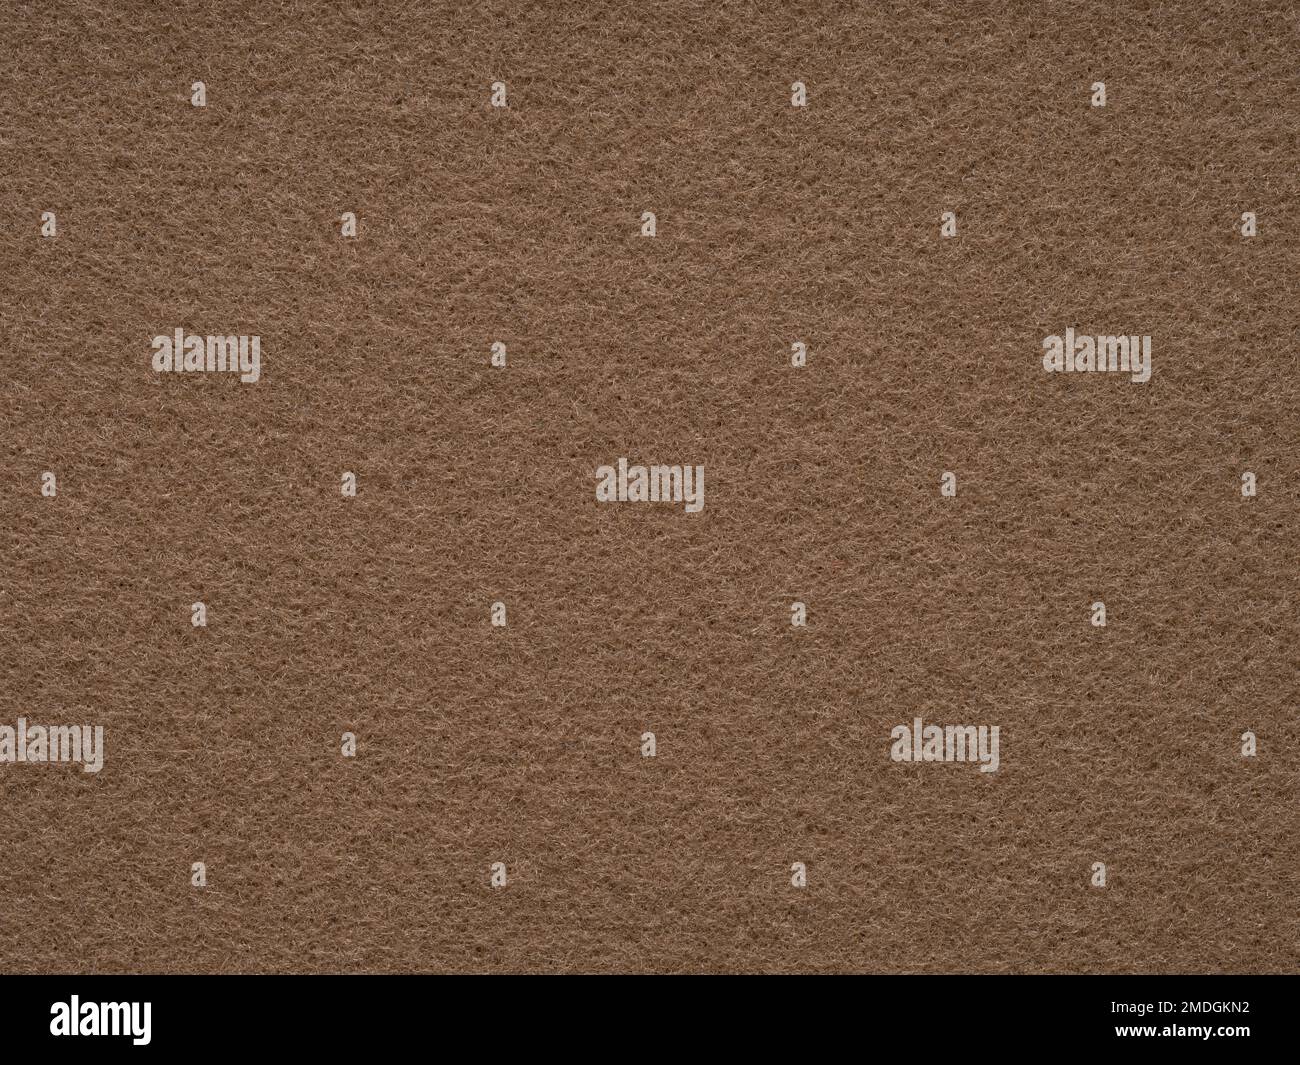 Dark beige blank felt texture closeup. Full frame retro, vintage pattern. Top view, layout, place for text. Textured pattern for shops with goods Stock Photo